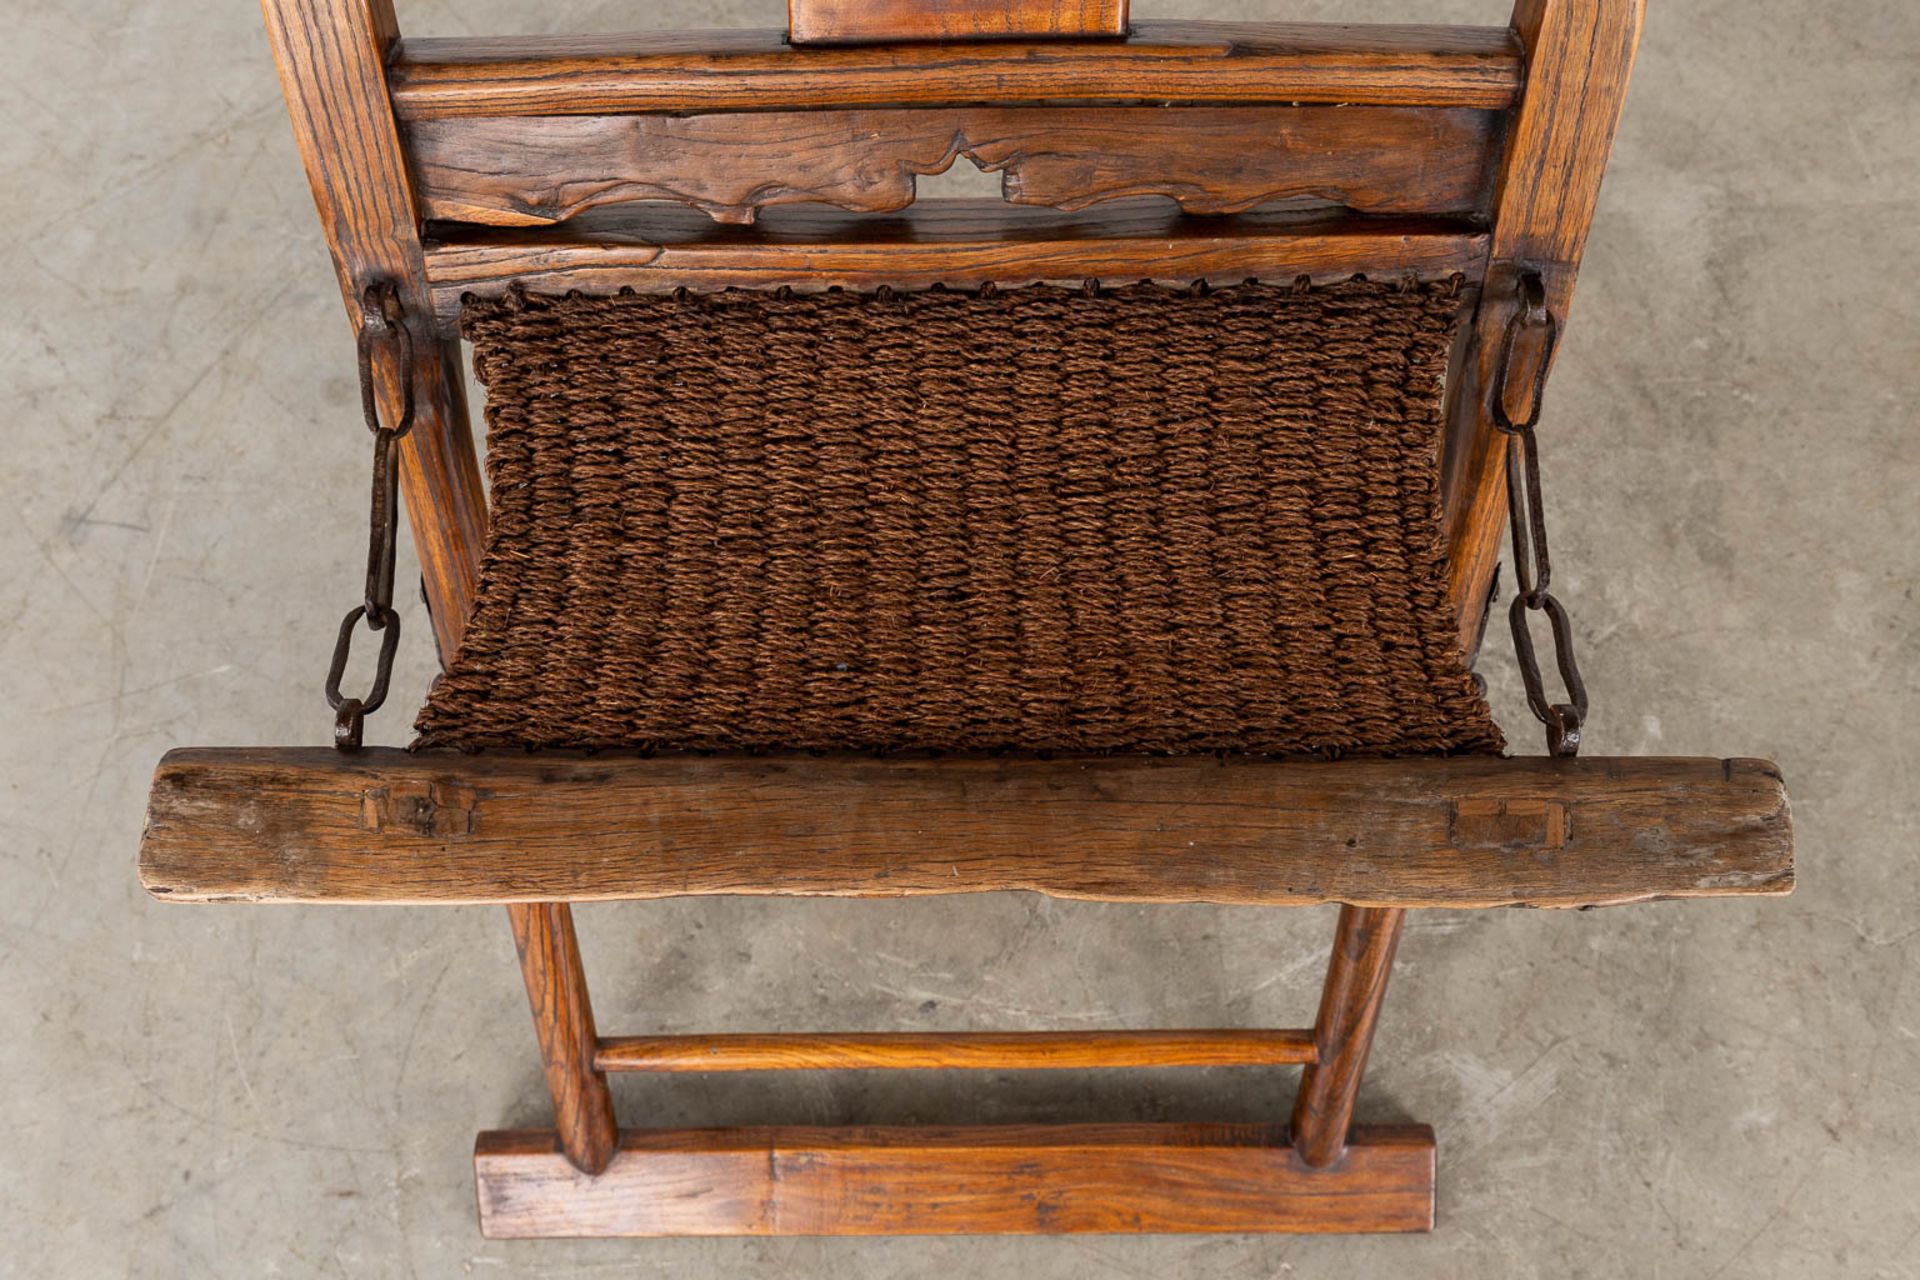 An antique Chinese travellers folding chair, probably 18th/19th C. (D:50 x W:60 x H:116 cm) - Image 9 of 12